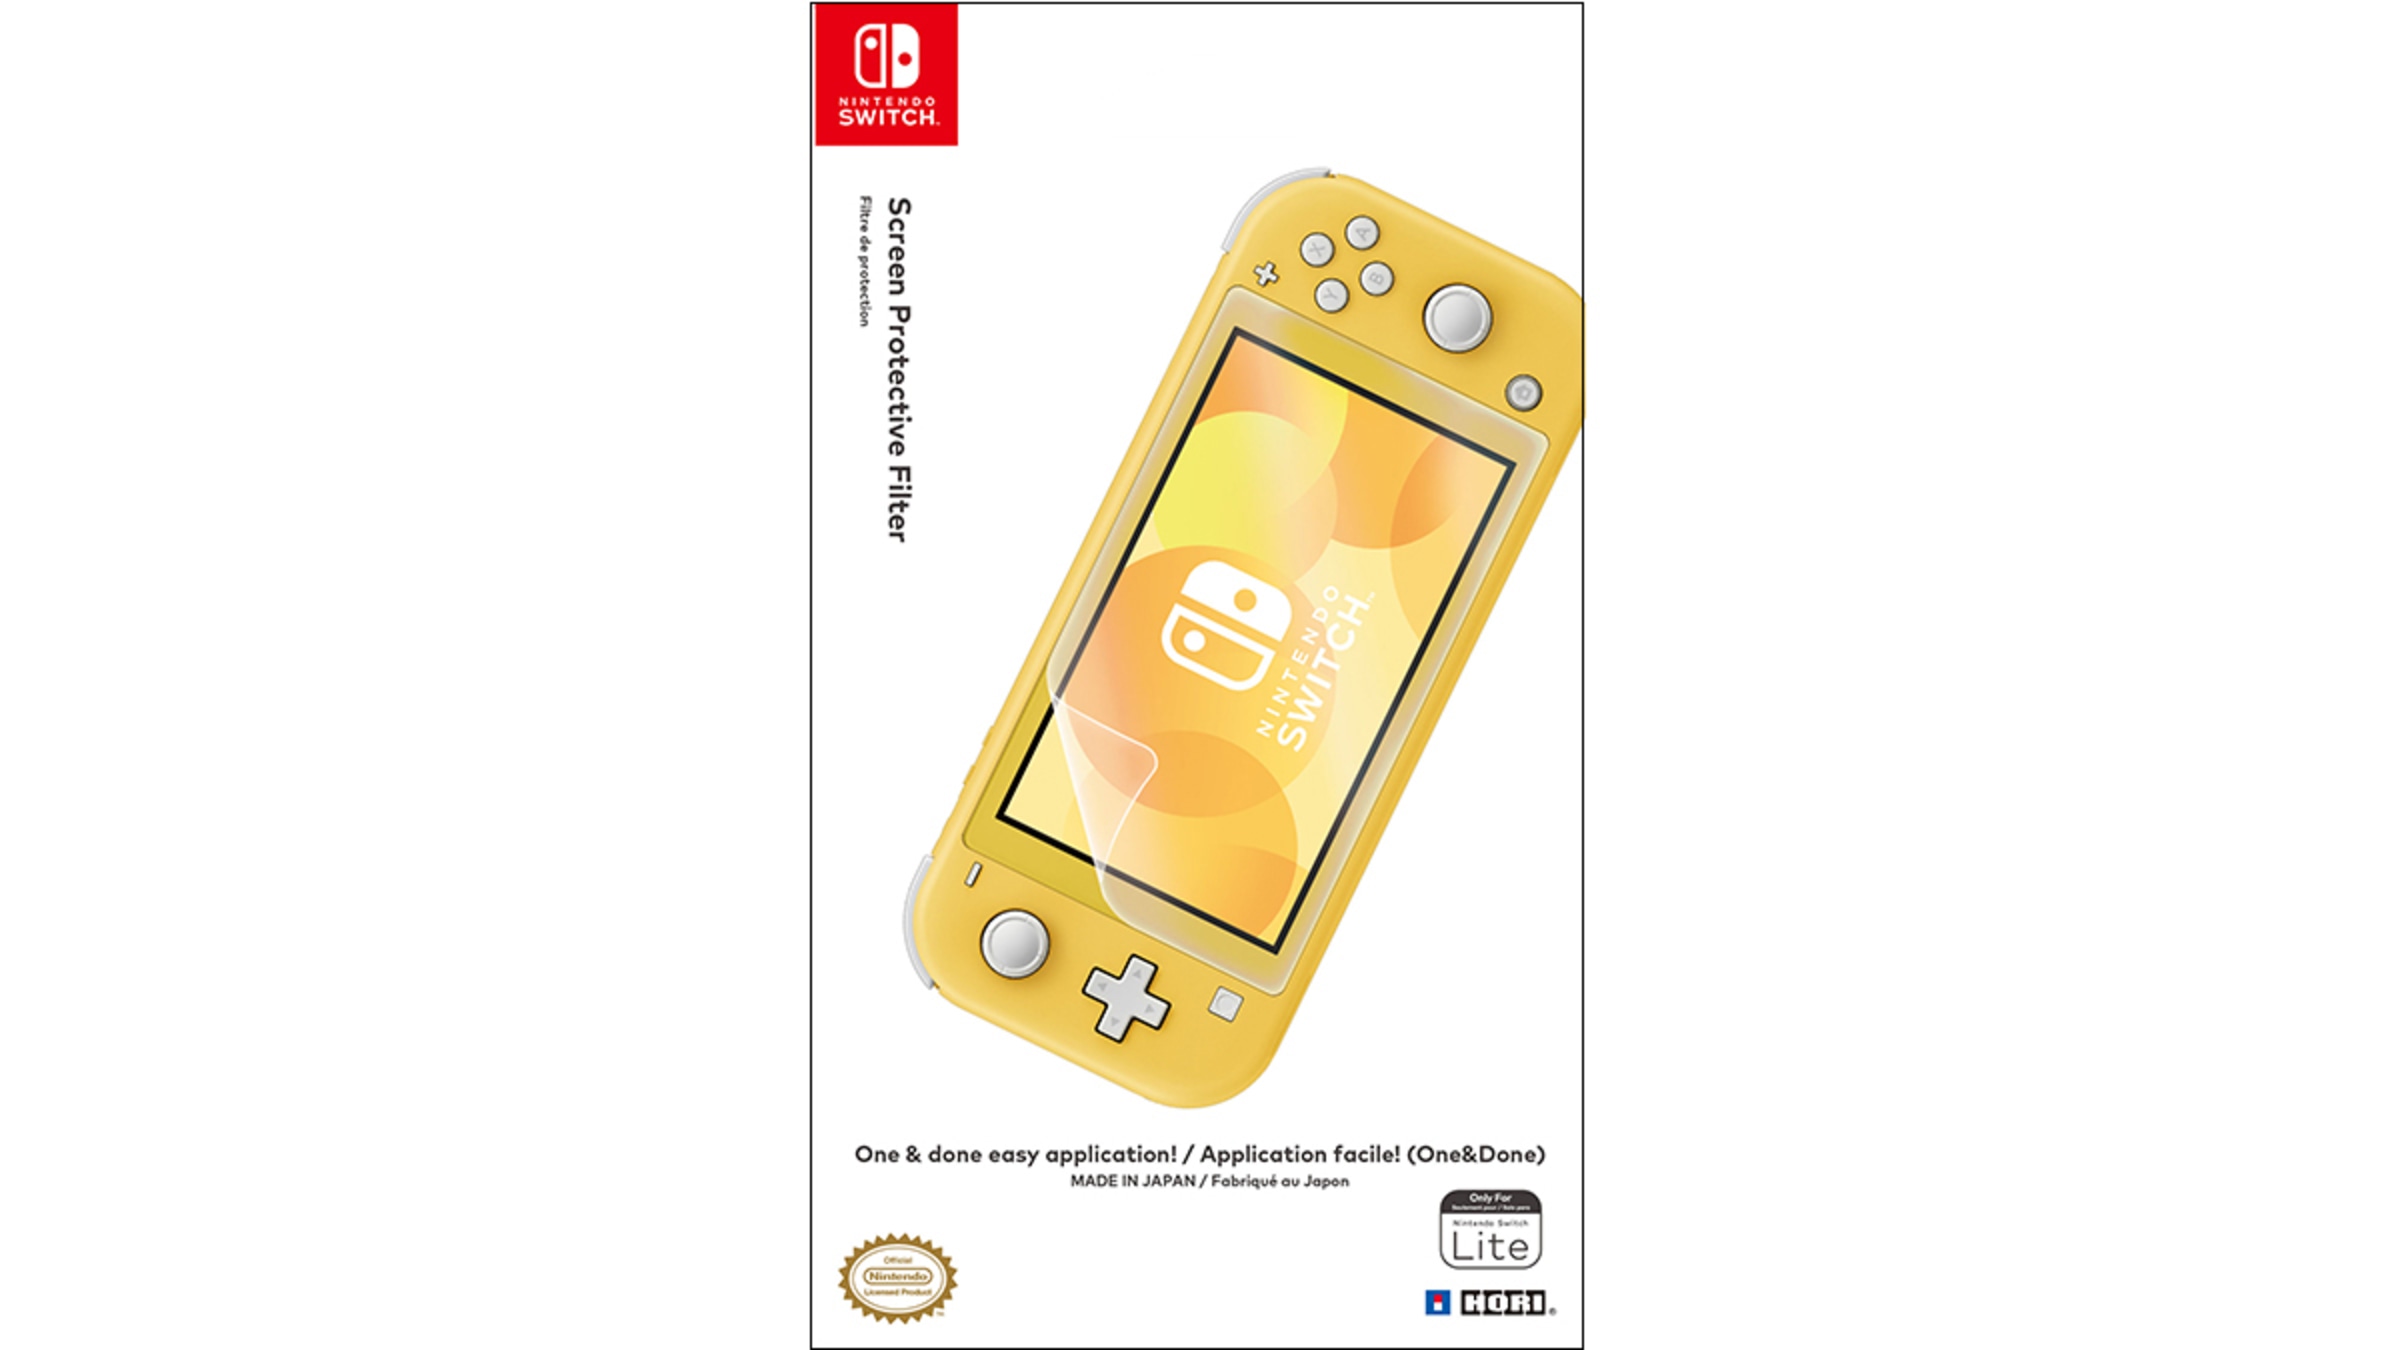 https://assets.nintendo.com/image/upload/c_fill,w_1200/q_auto:best/f_auto/dpr_2.0/ncom/en_US/products/accessories/nintendo-switch/other-accessories/screen-protective-filter/114292-hori-nintendo-switch-lite-screen-protective-filter-package-1200x675